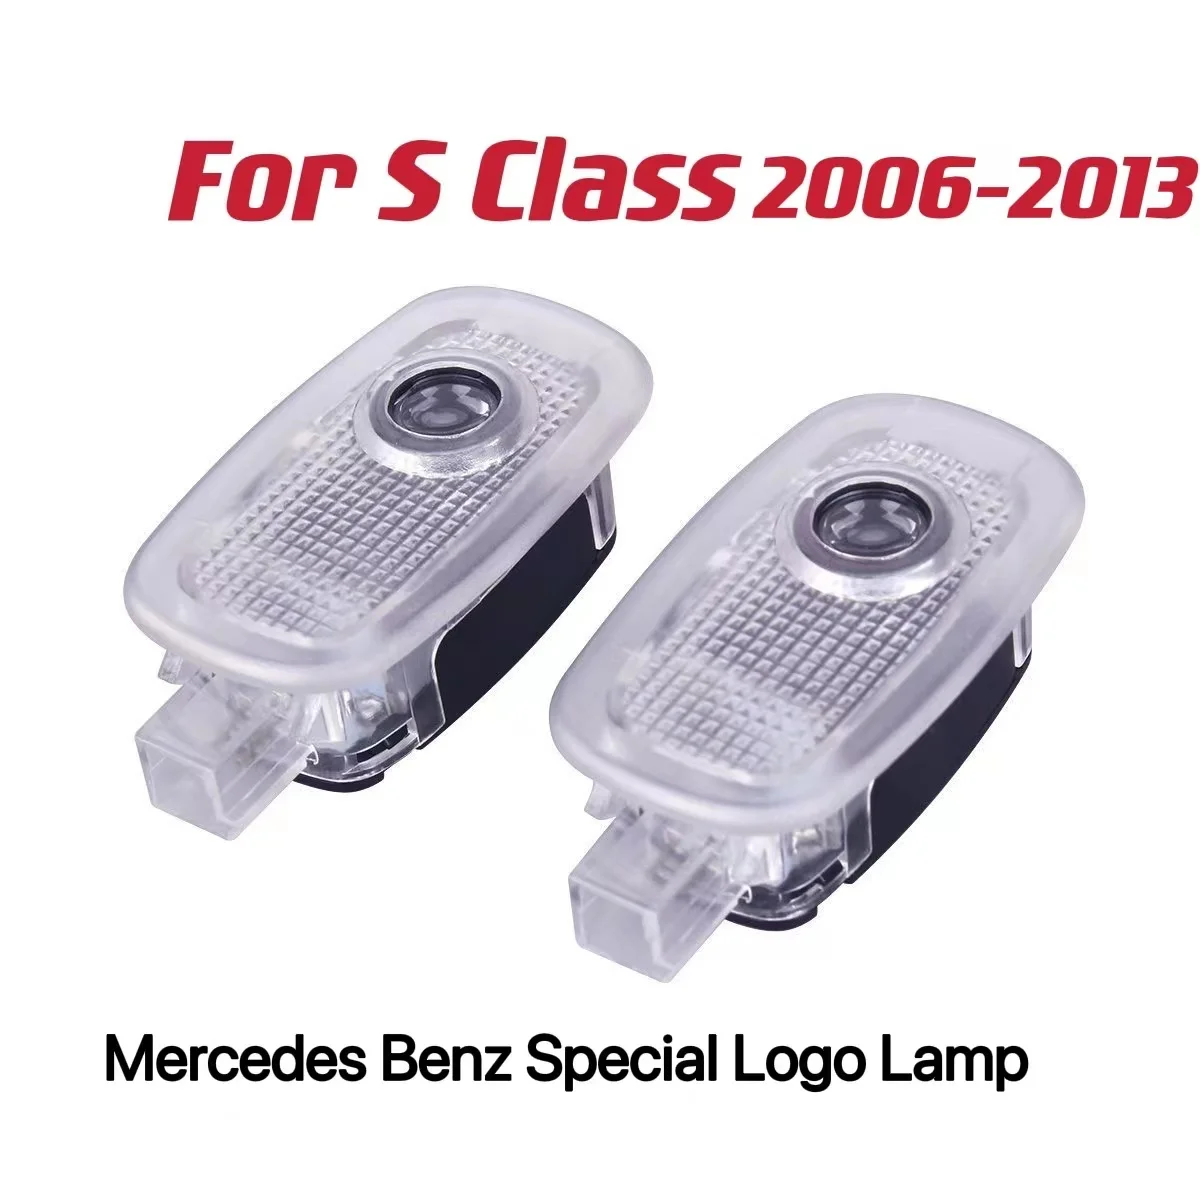 

2X Led Car Door Logo Laser Projector Light For Mercedes Benz S Class Maybach W221 S350 S450 S300 S500 S63 S65 2006-2013